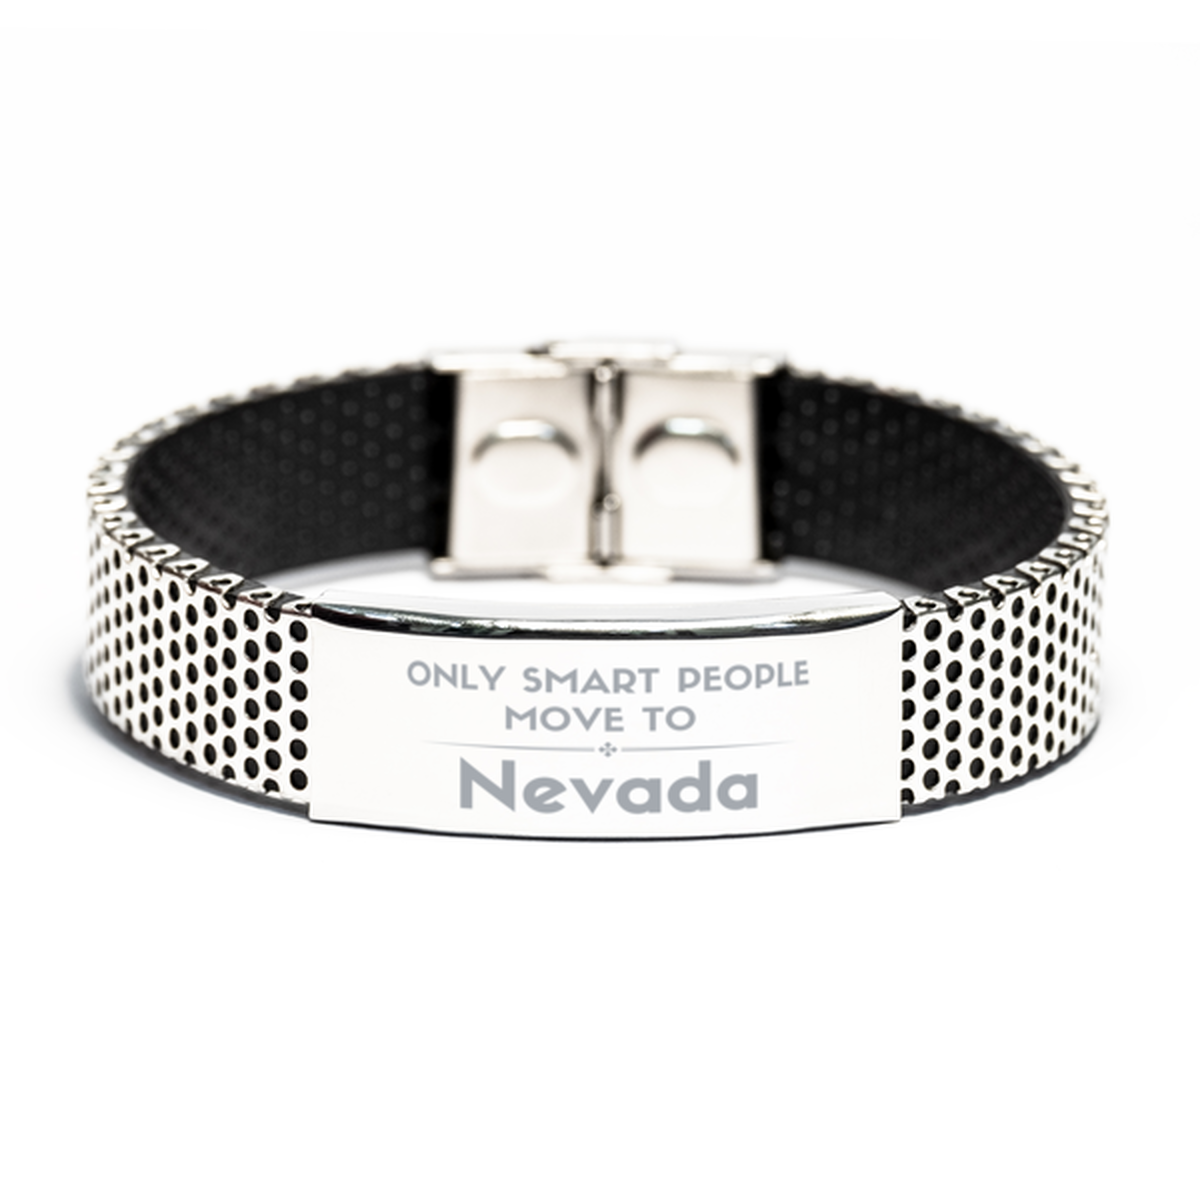 Only smart people move to Nevada Stainless Steel Bracelet, Gag Gifts For Nevada, Move to Nevada Gifts for Friends Coworker Funny Saying Quote